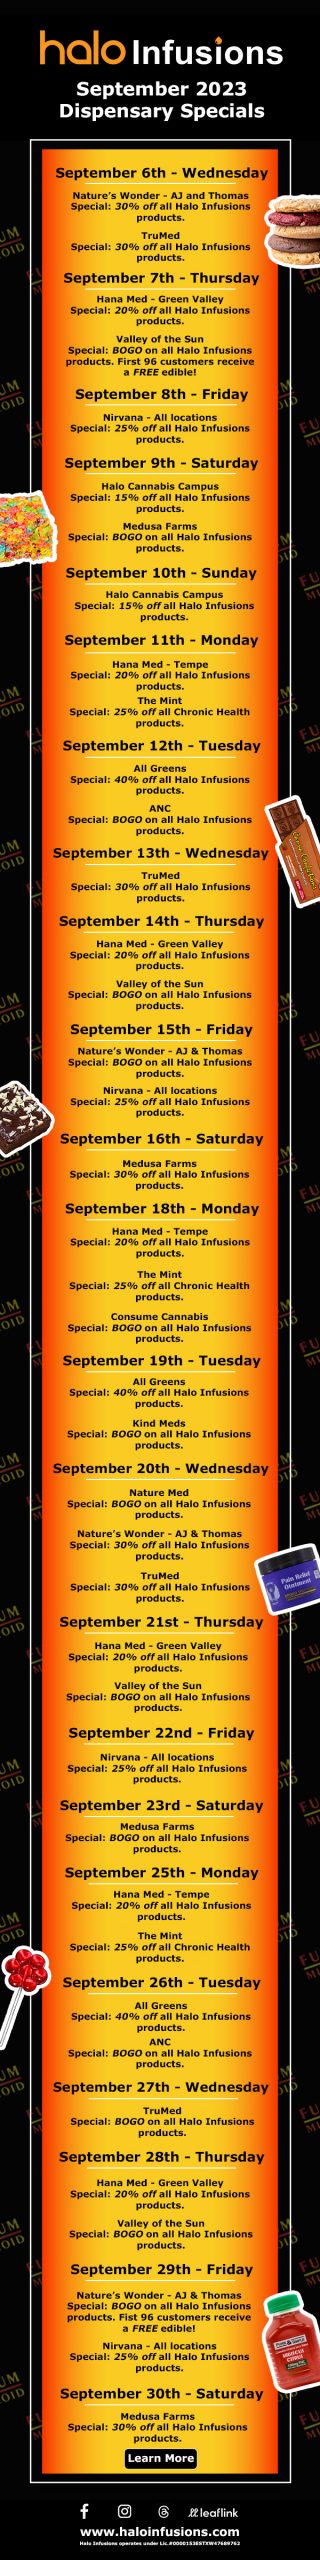 September 2023 dispensary specials for tucson edibles. Halo Infusions promos. Arizona's Largest Infusions Kitchen. Arizona edibles